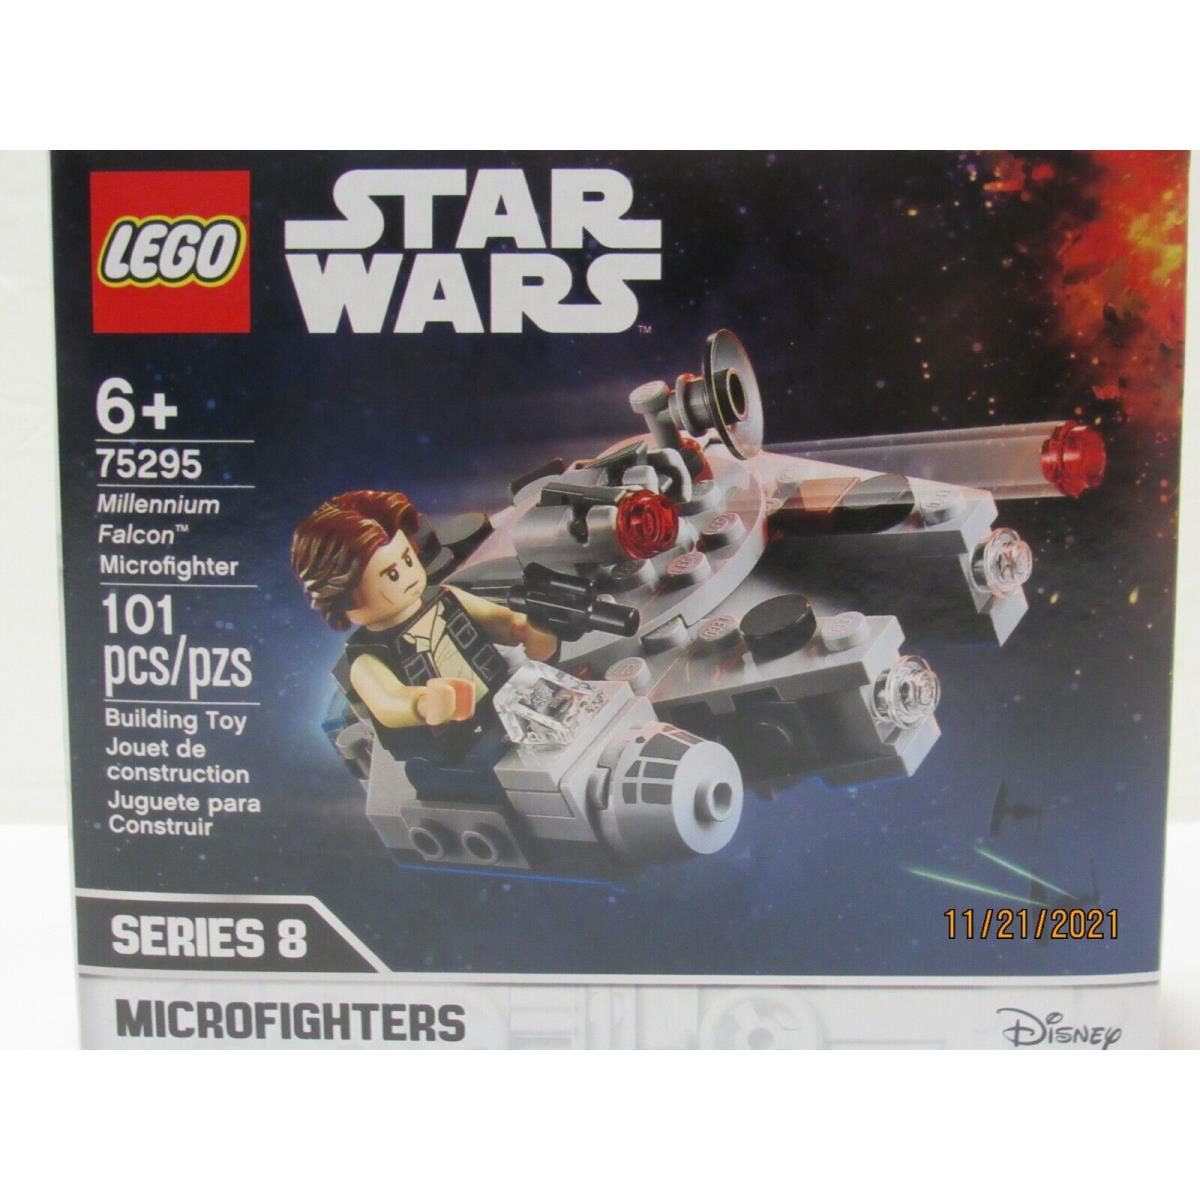 Lego Star Wars Millennium Falcon Microfighter 75295 Ages 6+ 101 Pieces